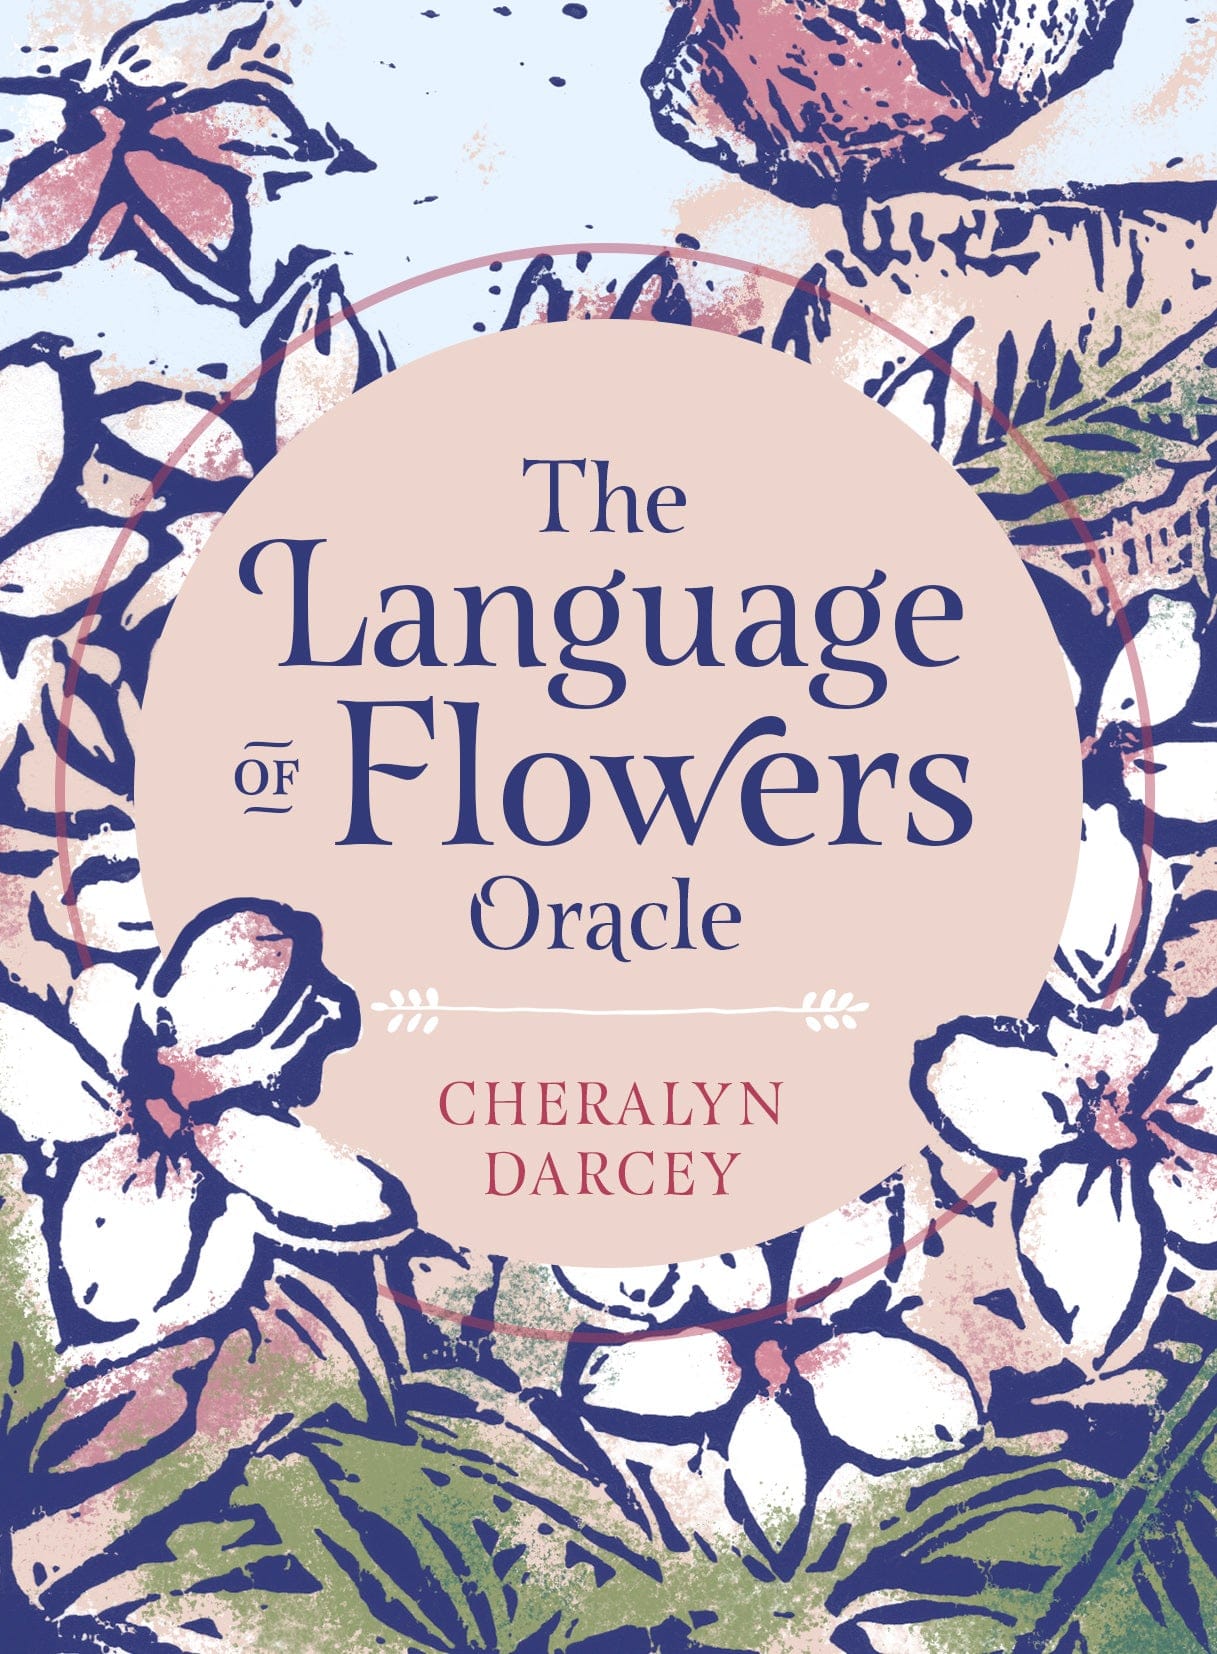 Language of Flower Oracle - Sacred Botanical Guidance and Support by Cheralyn Darcey